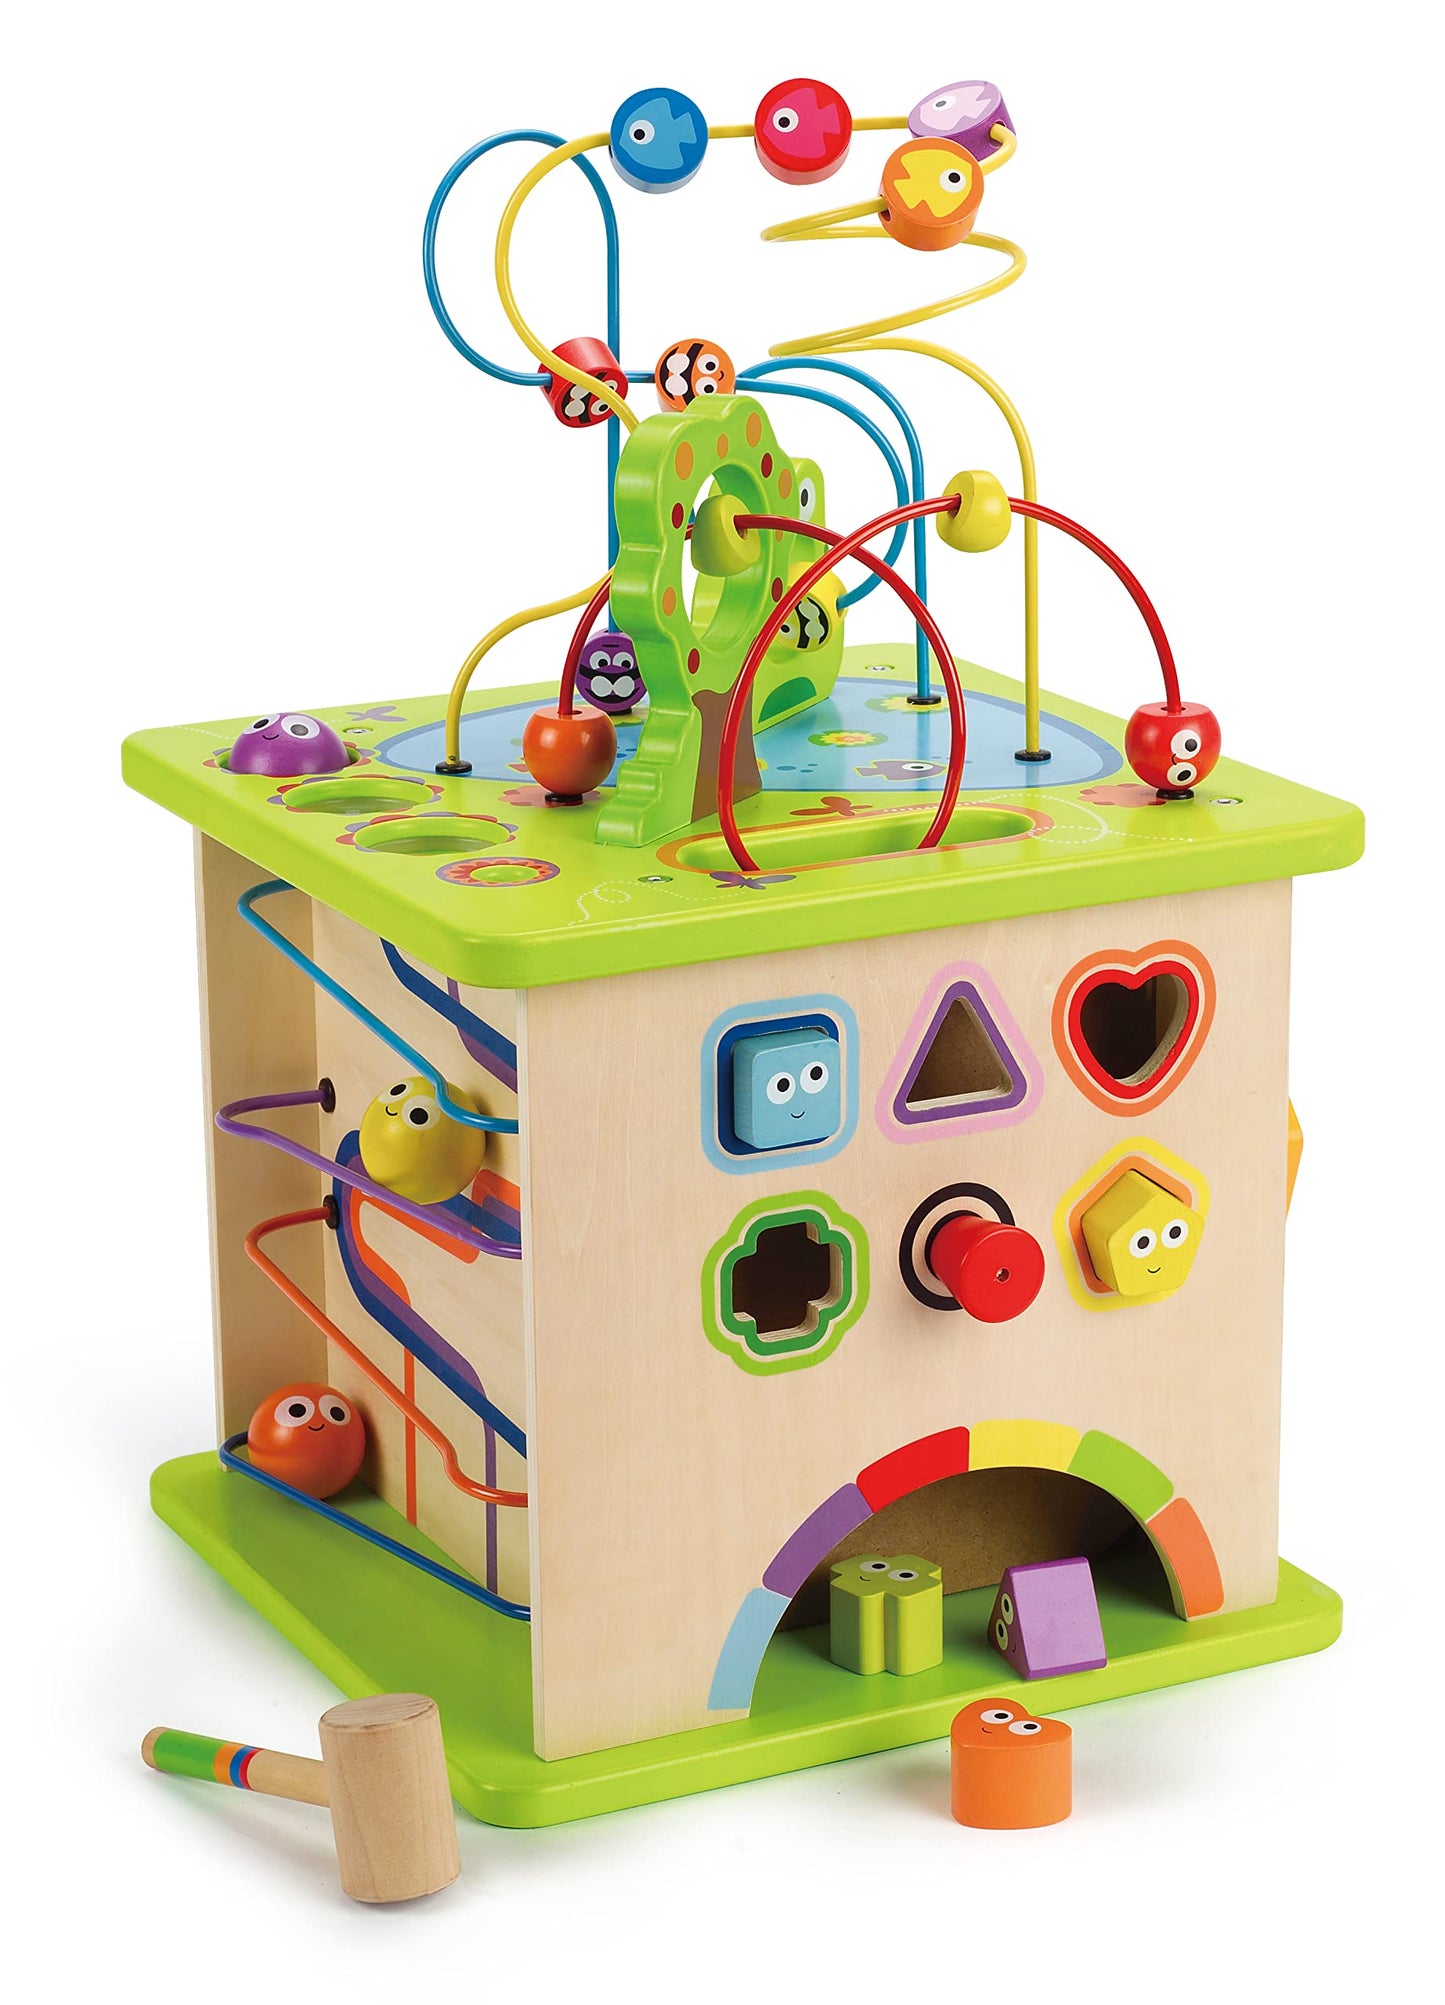 Country Critters Wooden Activity Play Cube by Hape